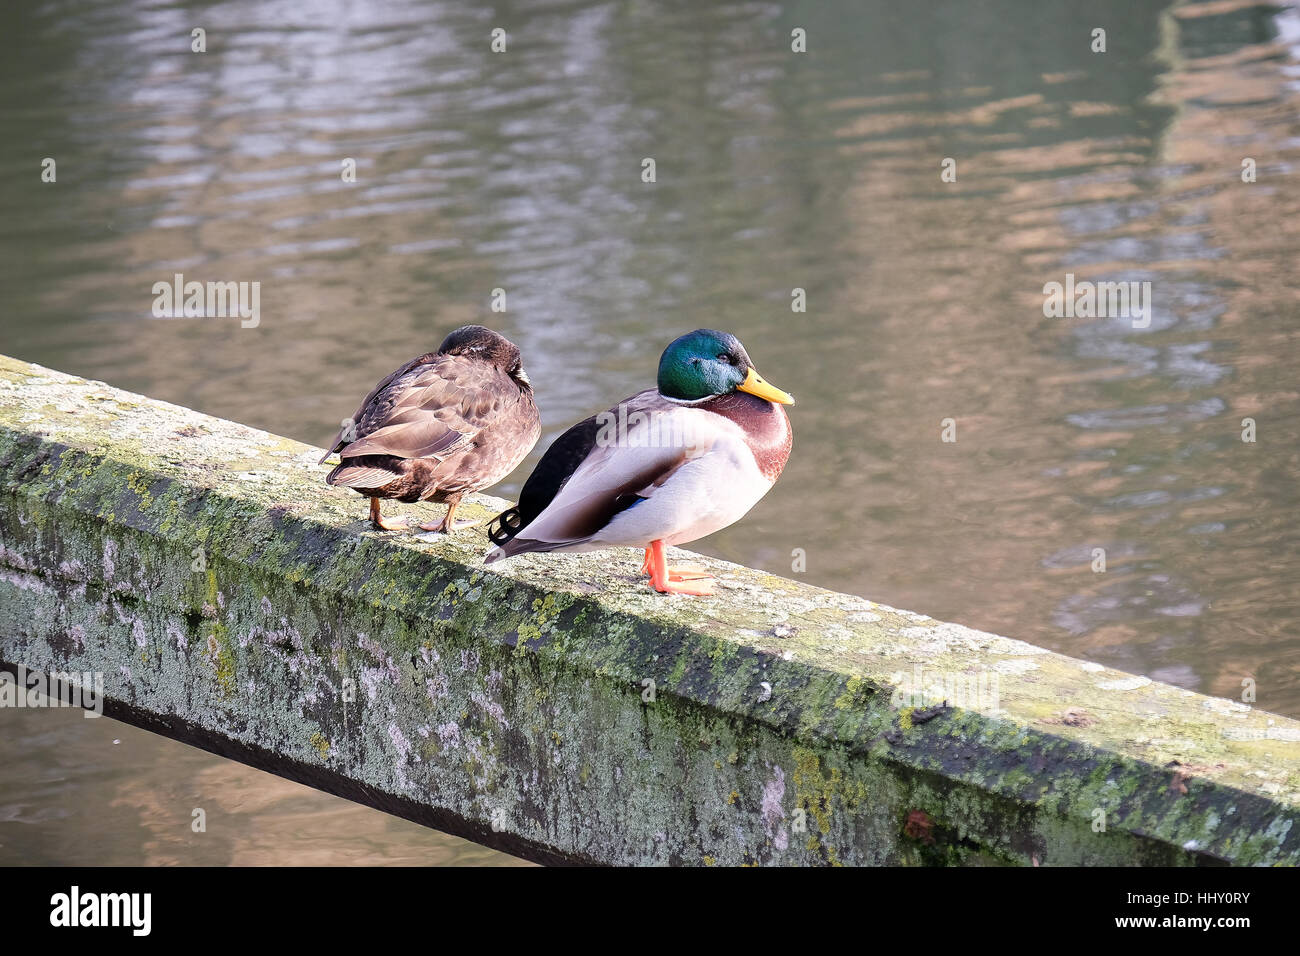 Two ducks of differing plumage sit on a concrete ledge by the water Stock Photo